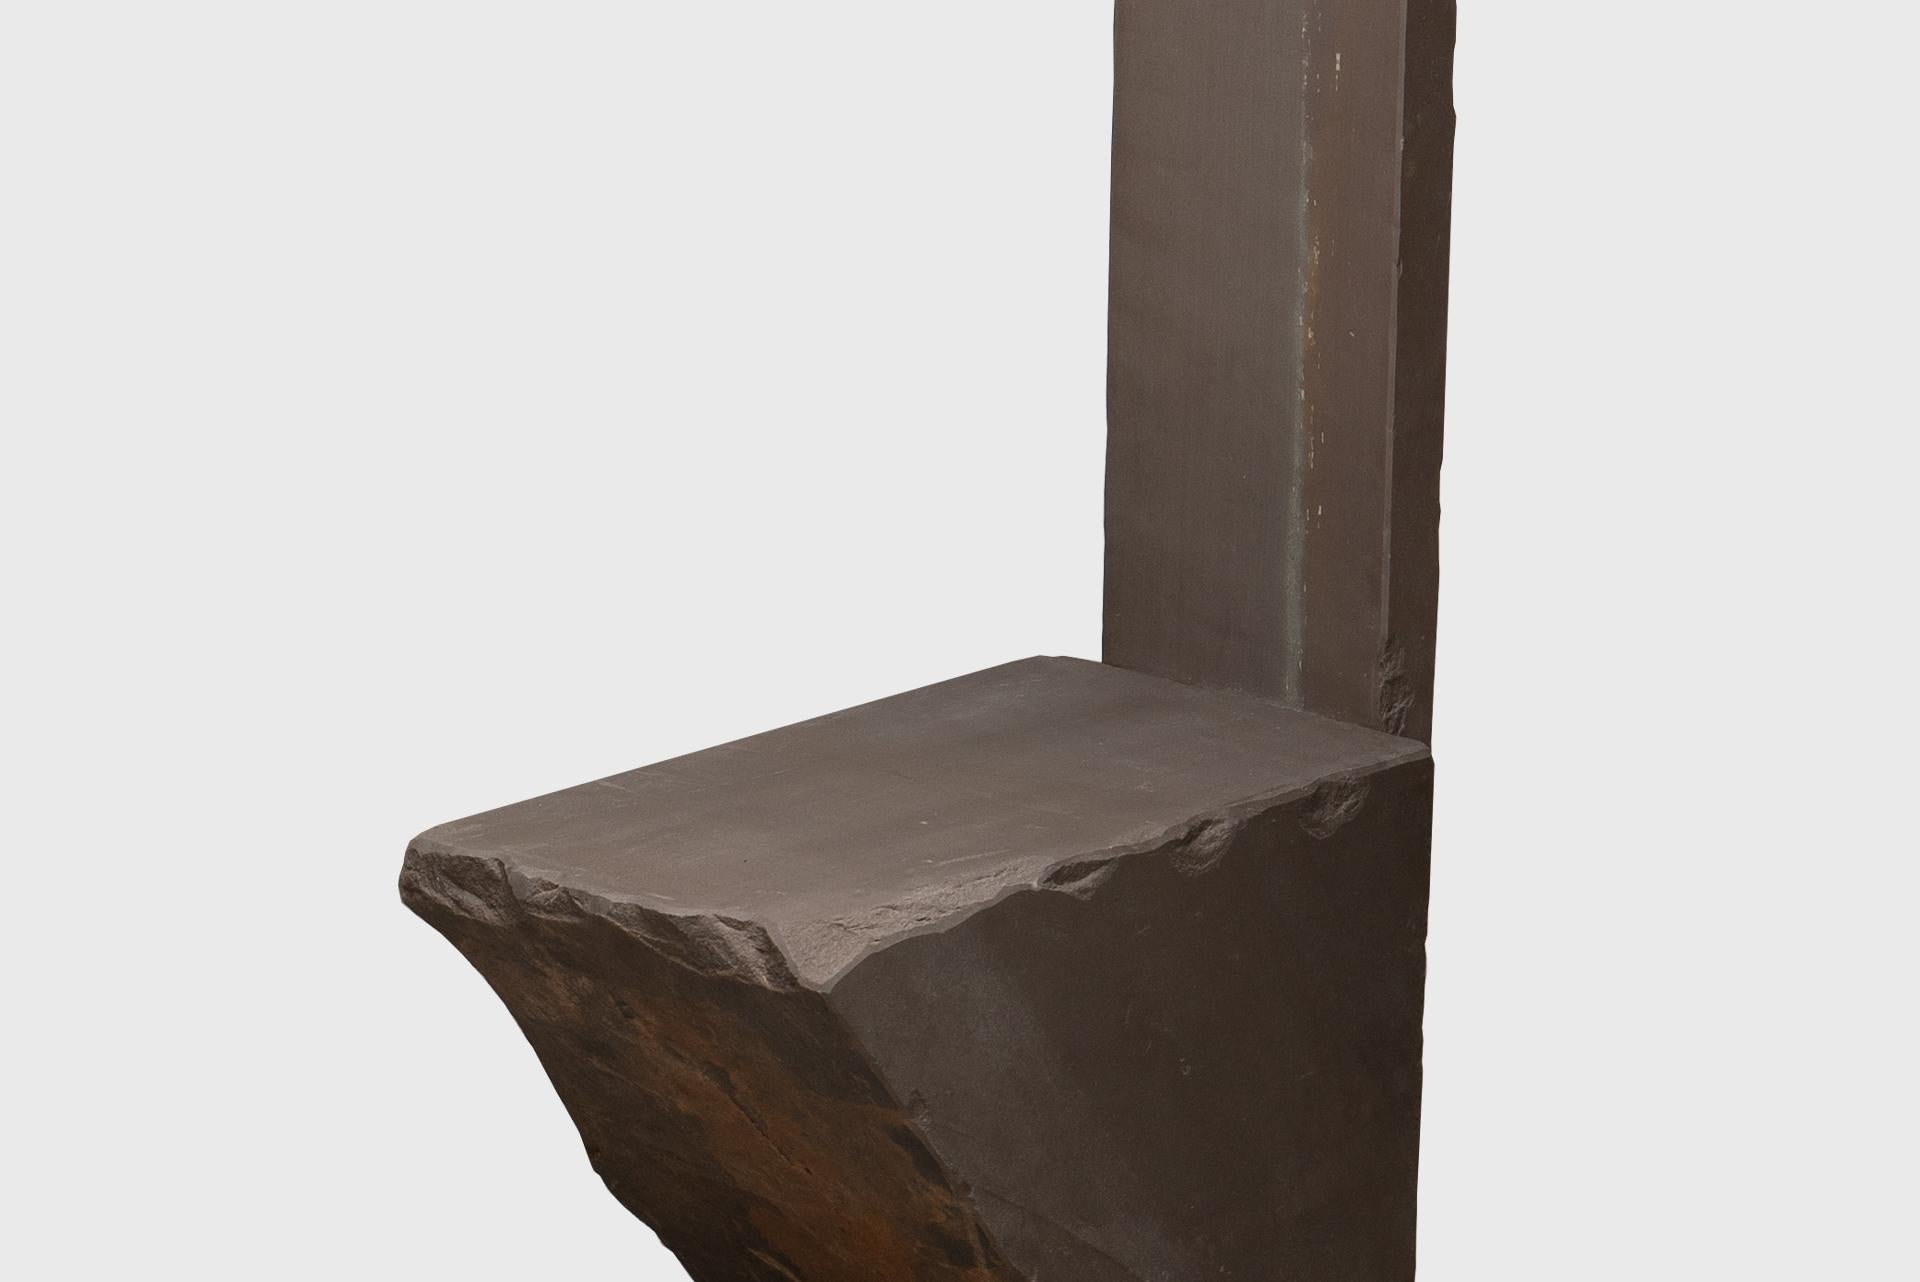 Contemporary Natural Chair 15, Graywacke Offcut Gray Stone, Carsten in der Elst For Sale 2